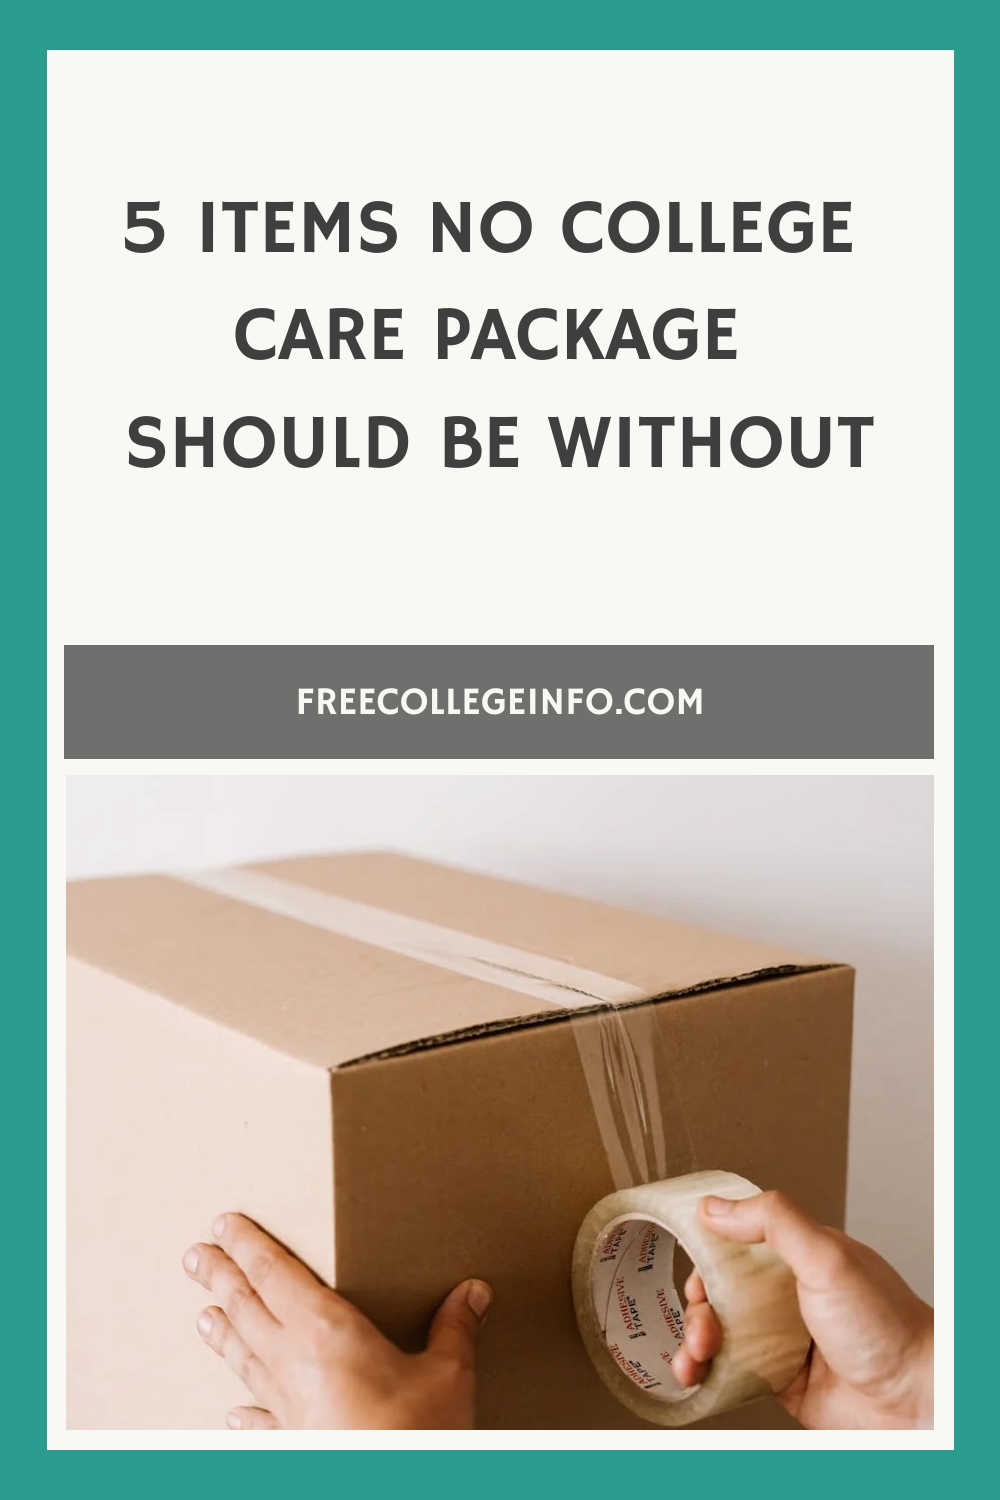 5 Items No College Care Package Should Be Without